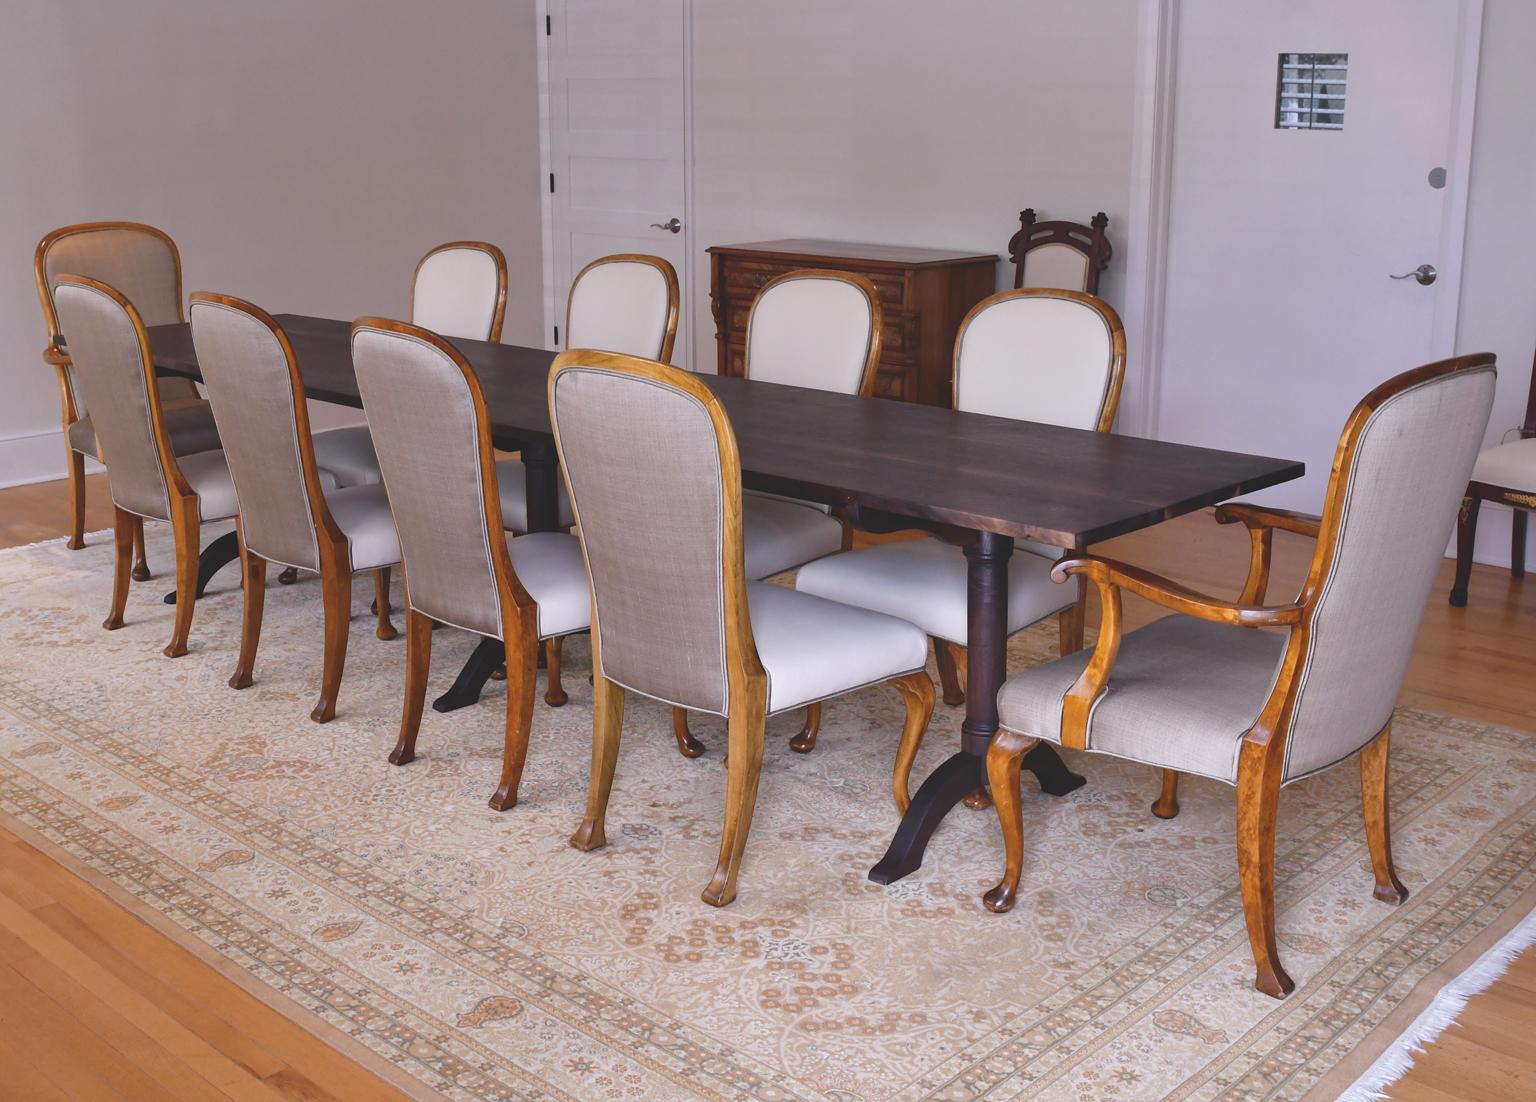 Set of 10 Mid-20th Century Birch Dining Chairs with Upholstered Back & Seats 13